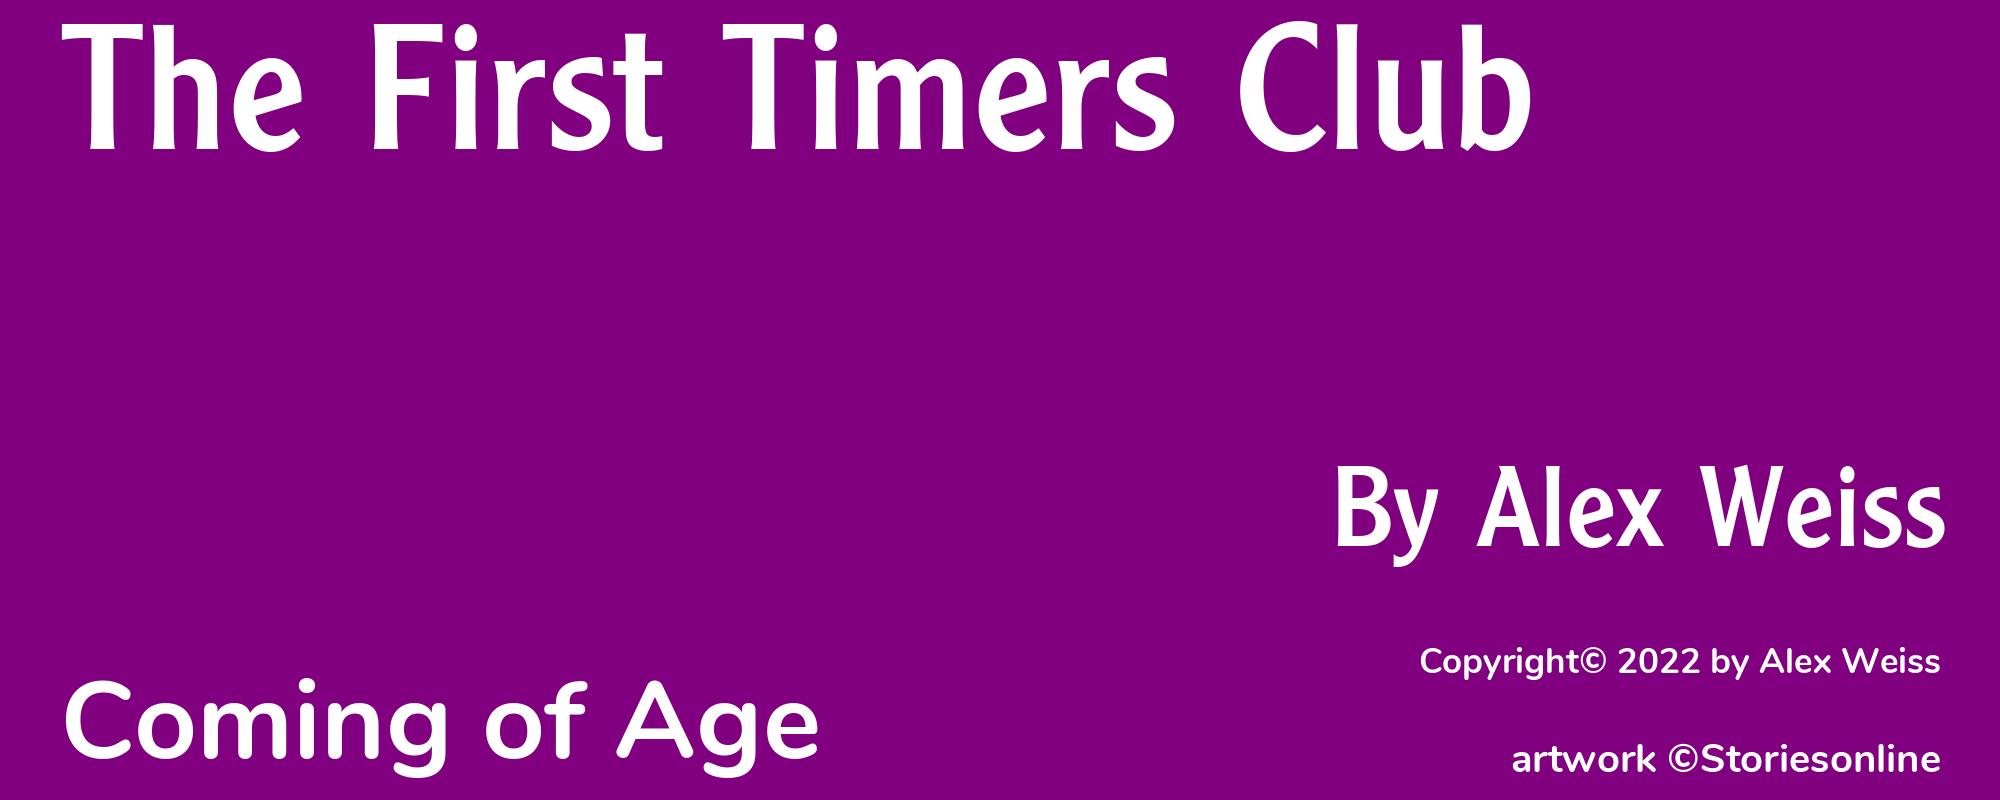 The First Timers Club - Cover